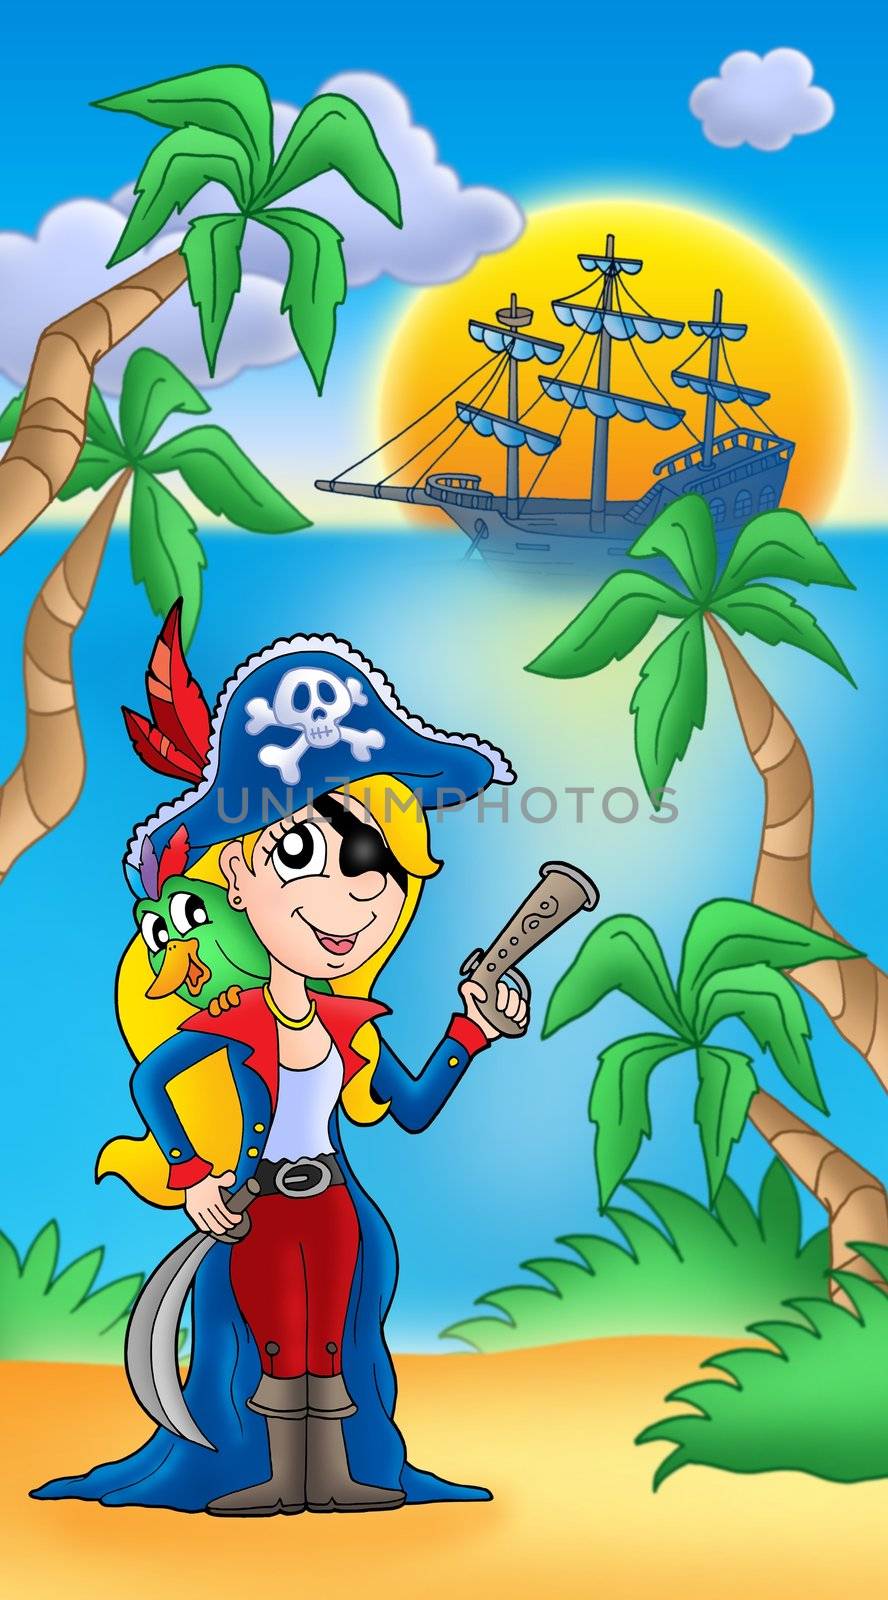 Pirate woman with parrot and boat - color illustration.